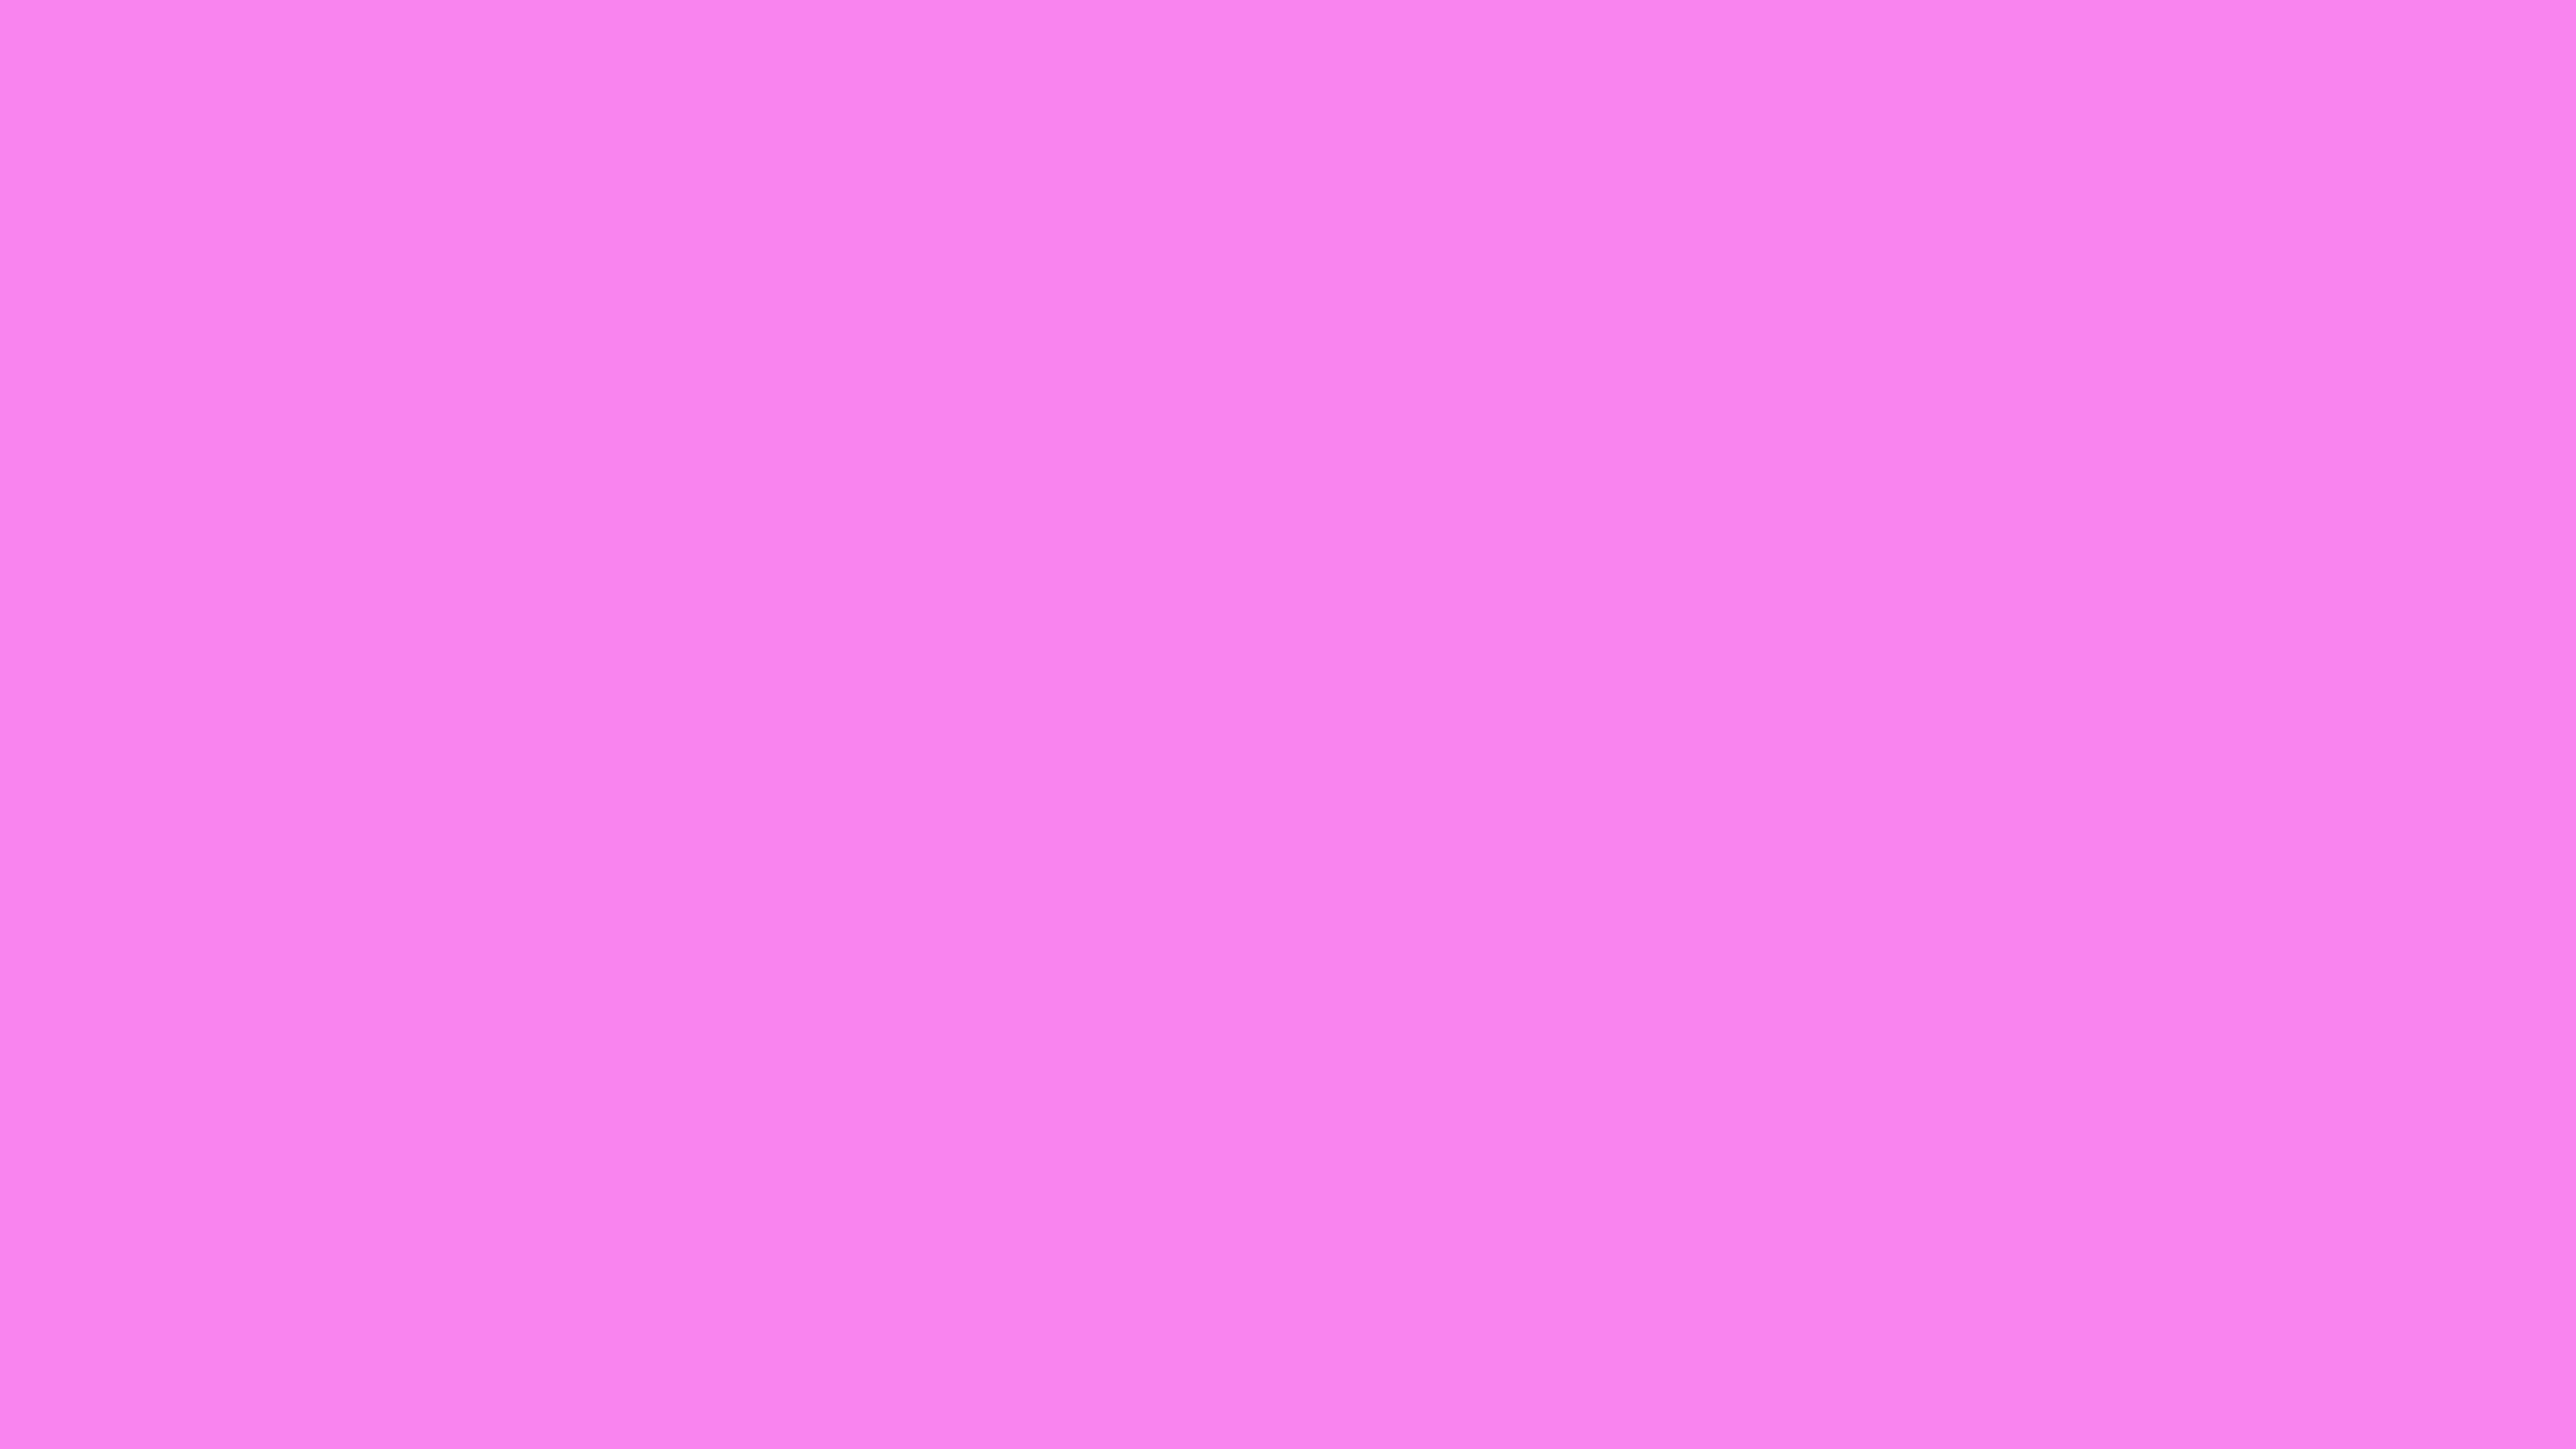 4096x2304 Light Fuchsia Pink Solid Color Background